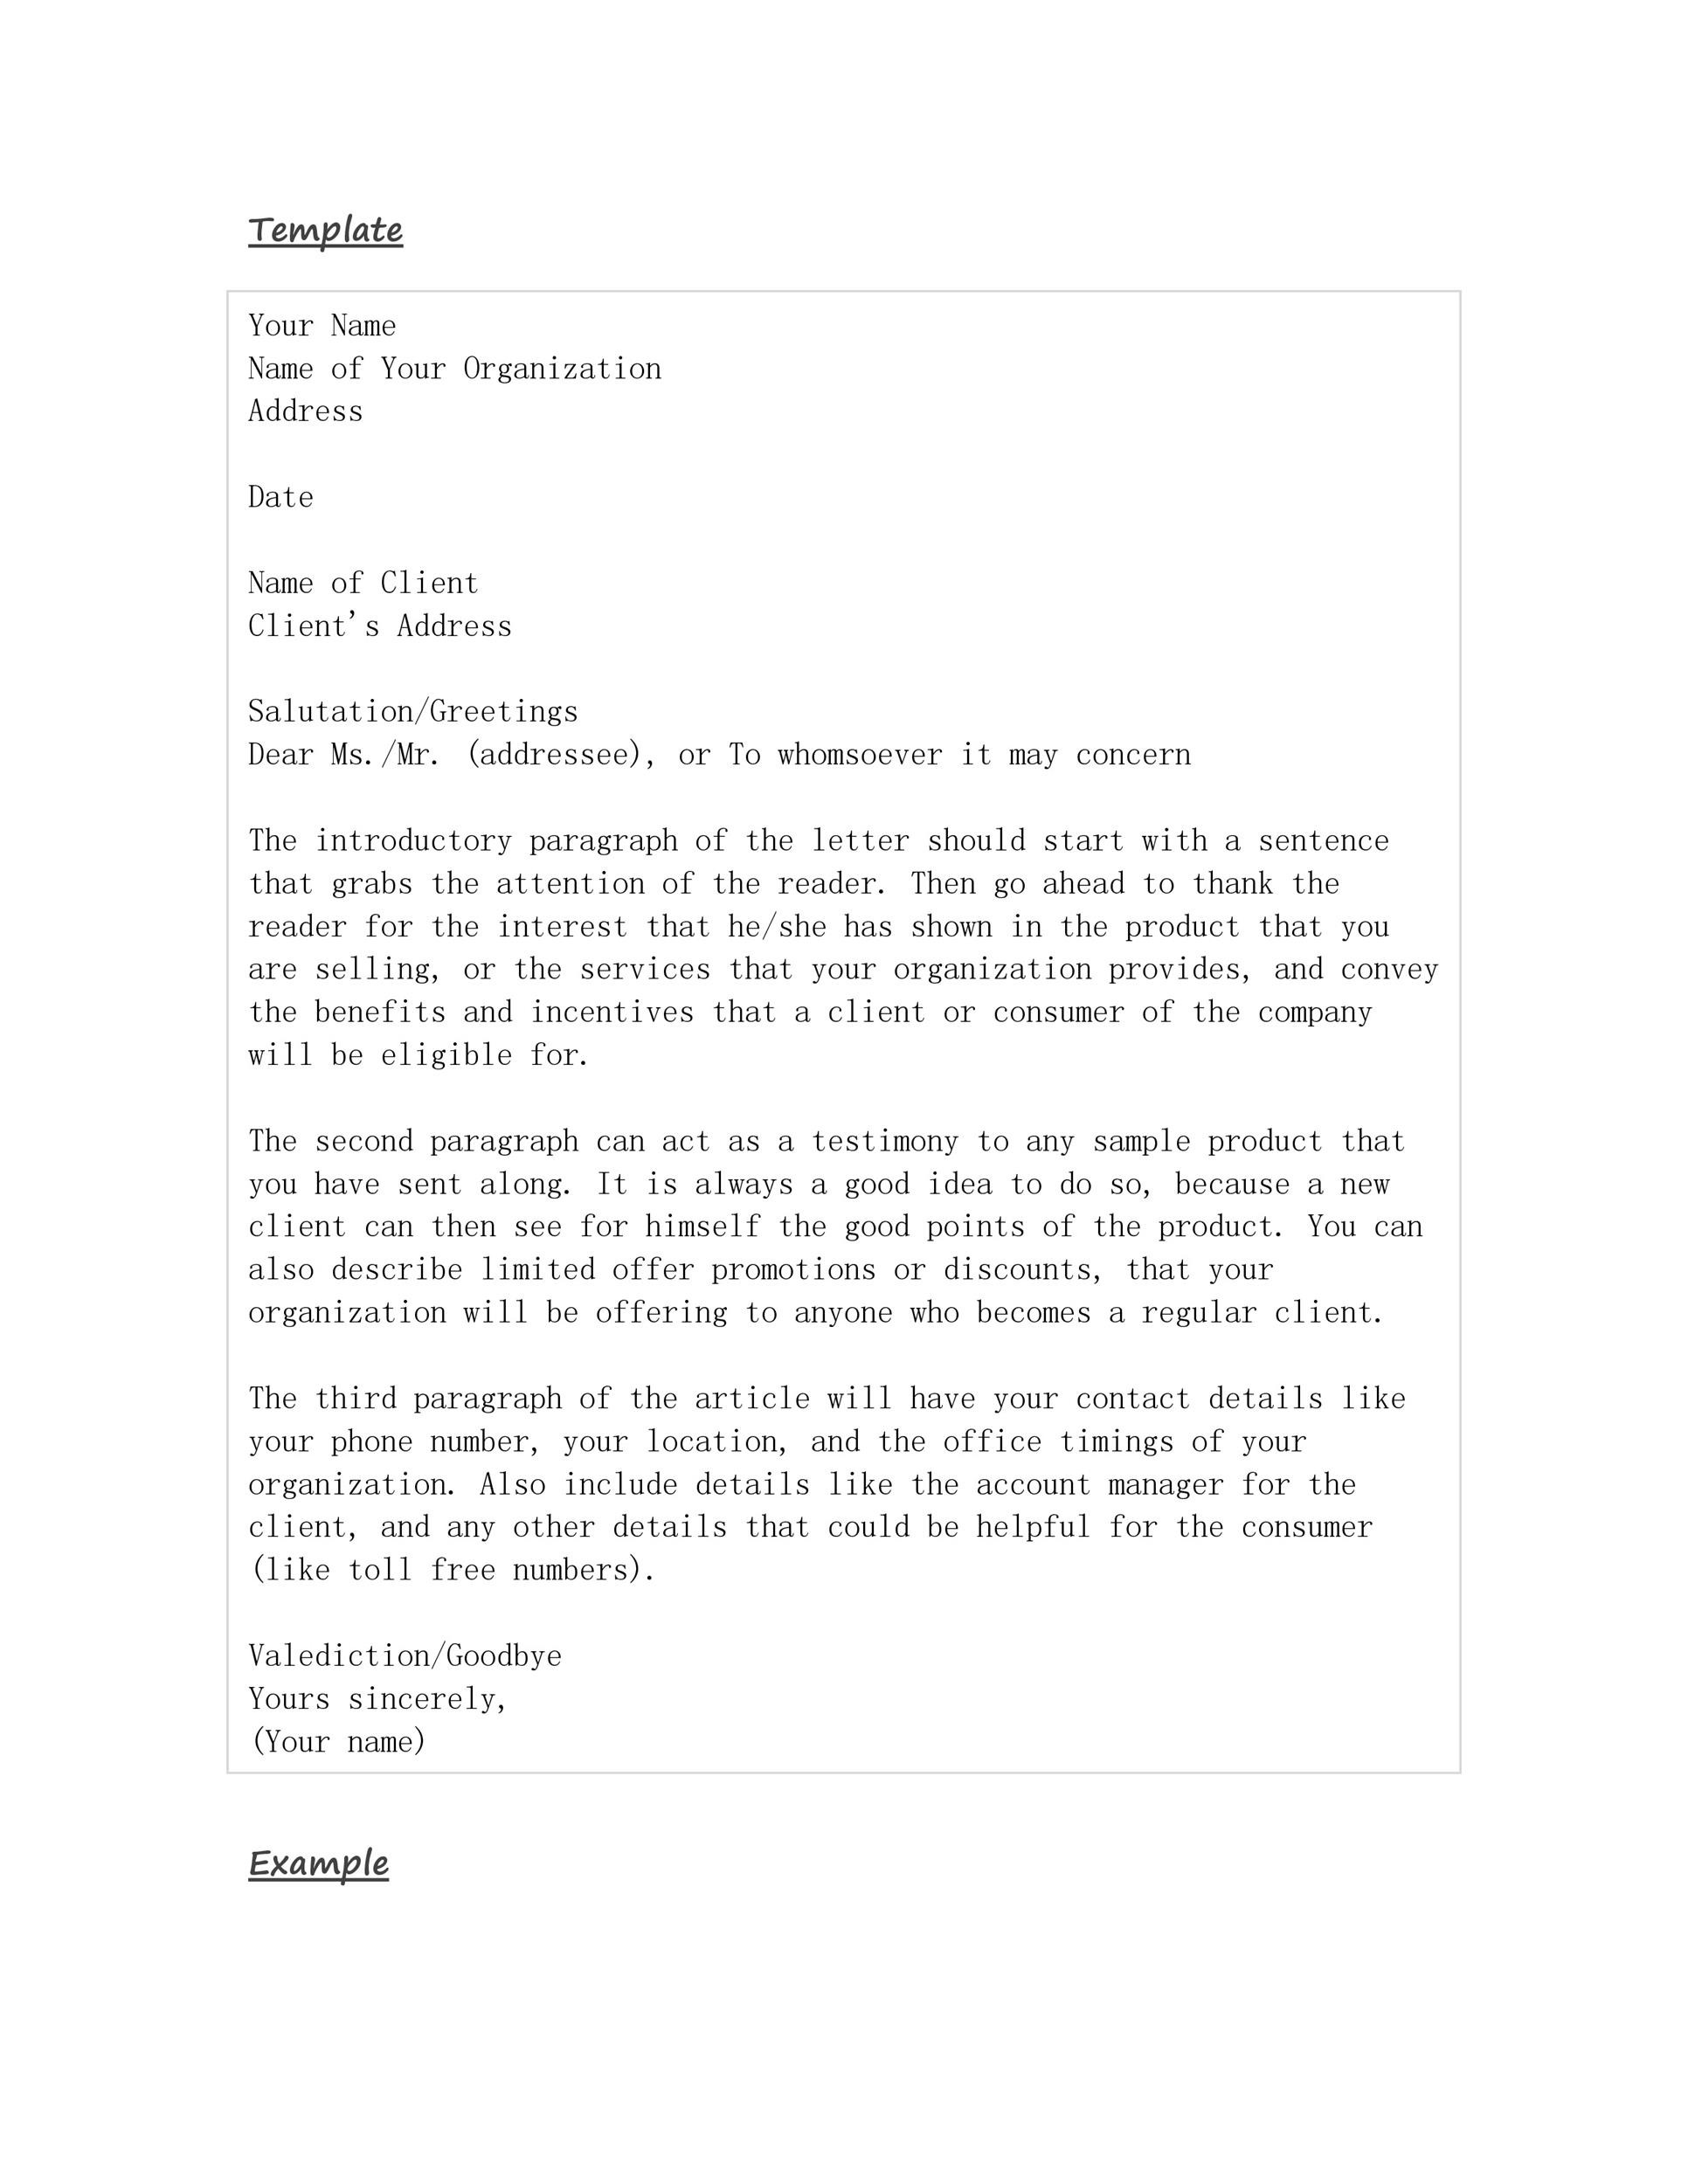 Sales Intro Letter Sample from templatelab.com